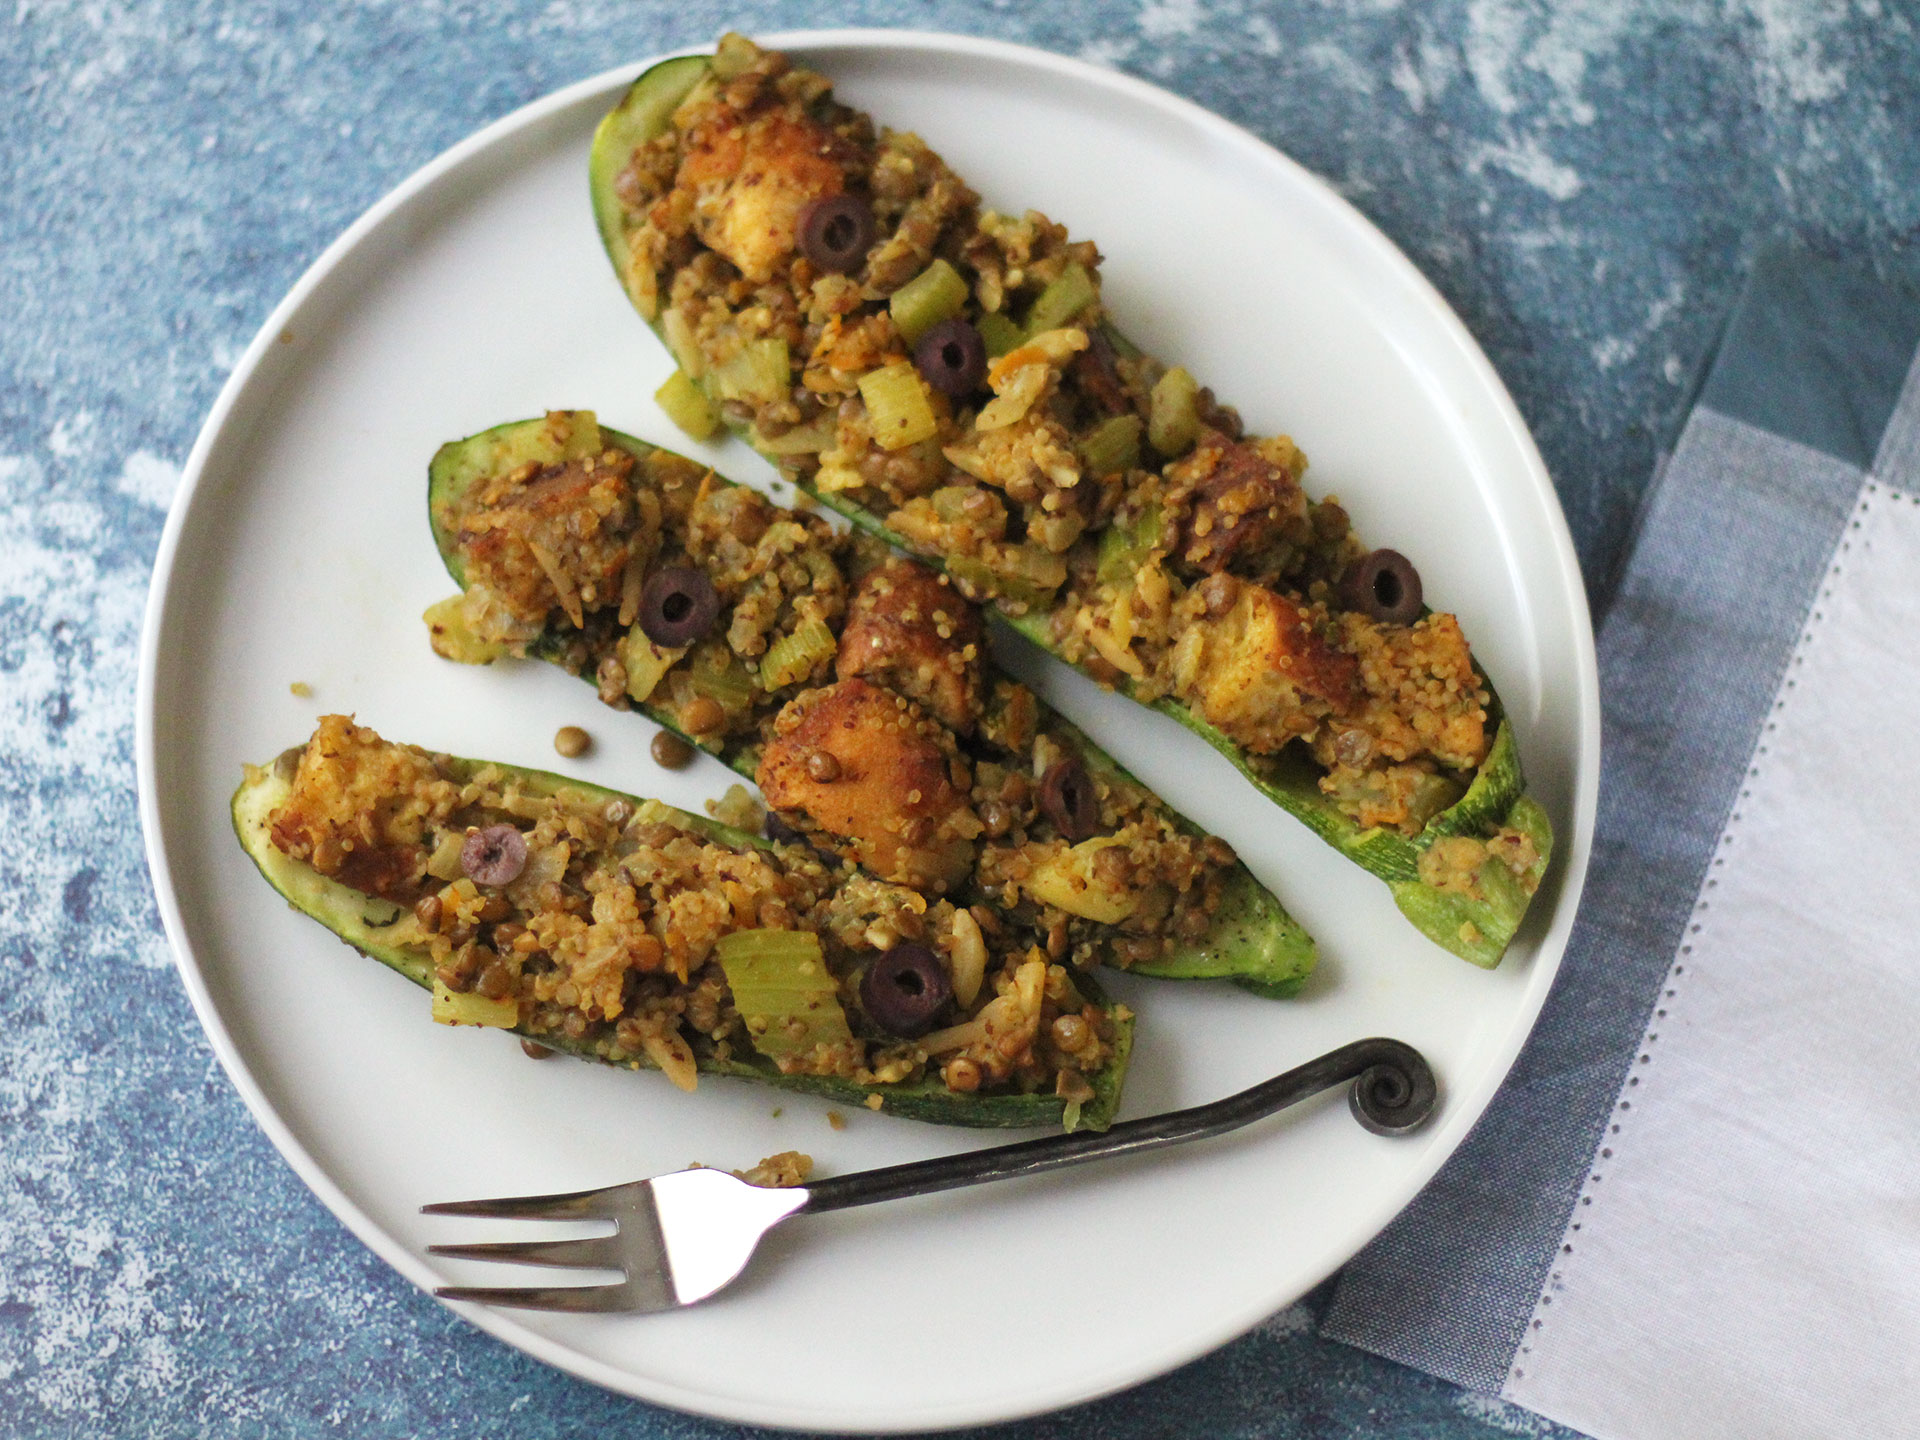 Zucchini With Quinoa and Lentil Stuffing